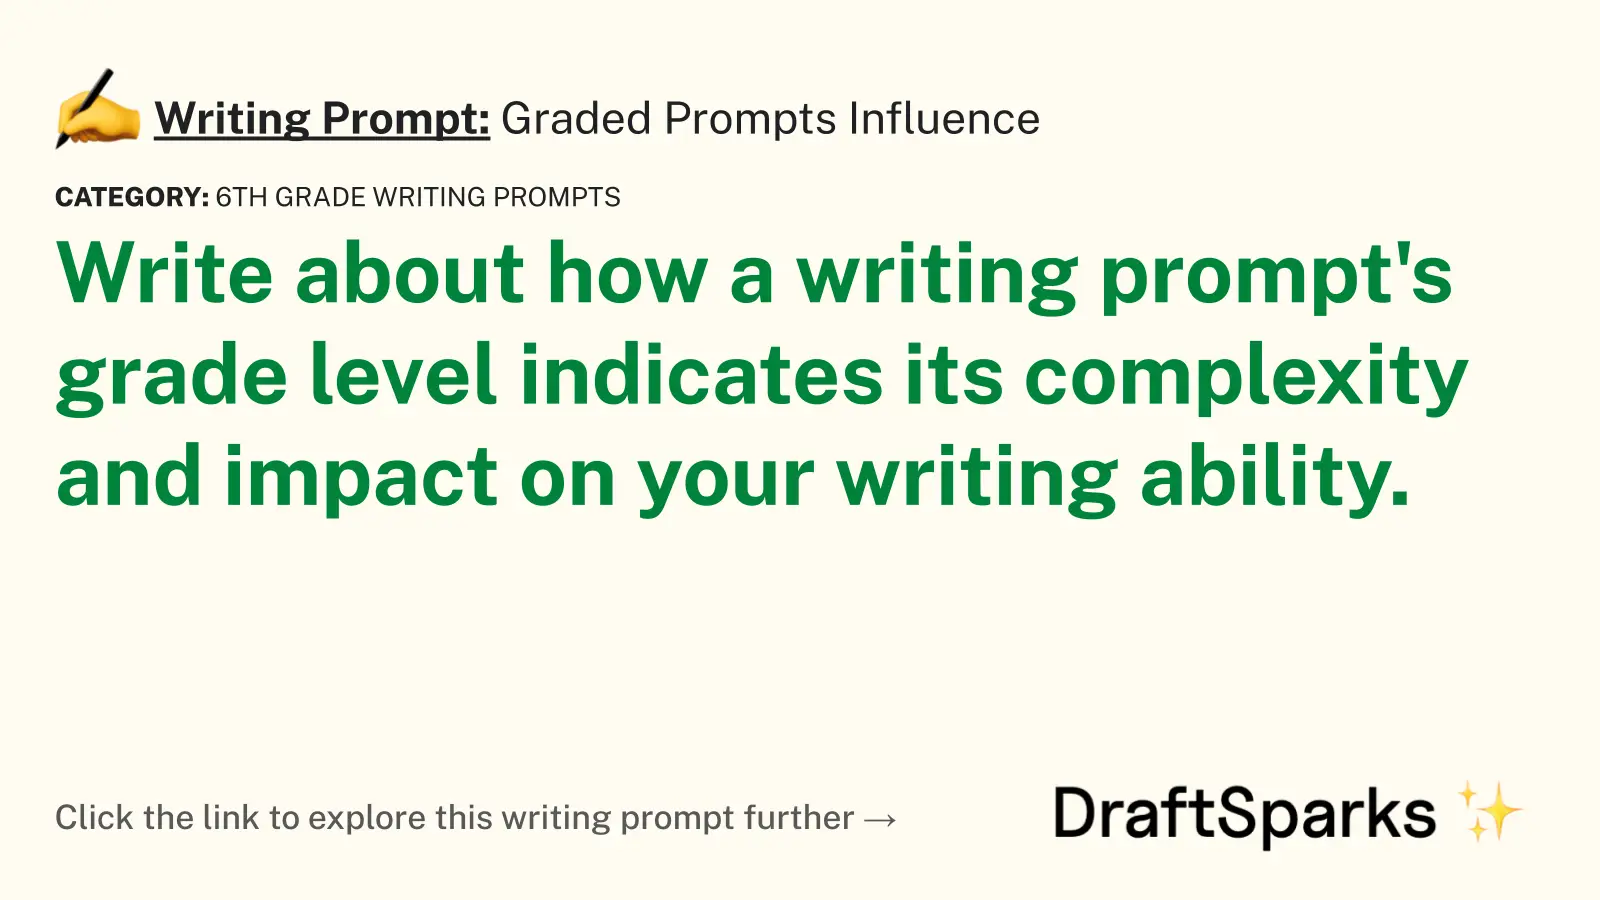 Graded Prompts Influence